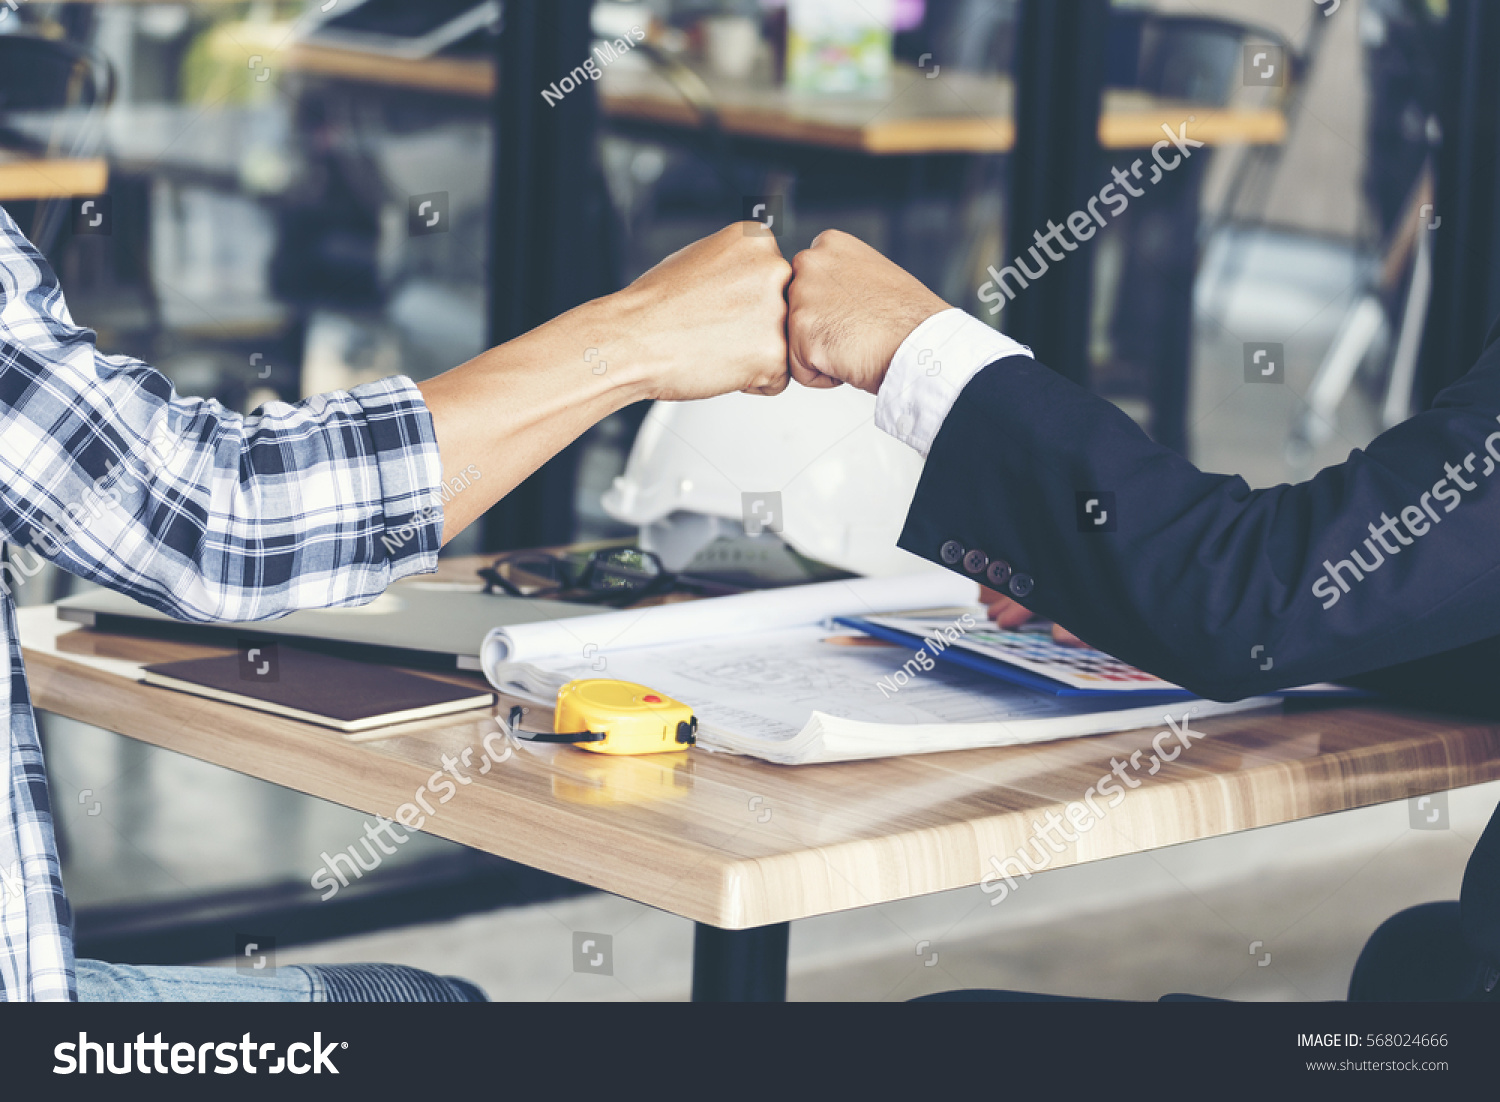 Partner Business Trust Teamwork Partnership. Industry contractor fist bump dealing mission business. Mission team meeting group of People Fist bump Hands together. Business industry trust teamwork #568024666